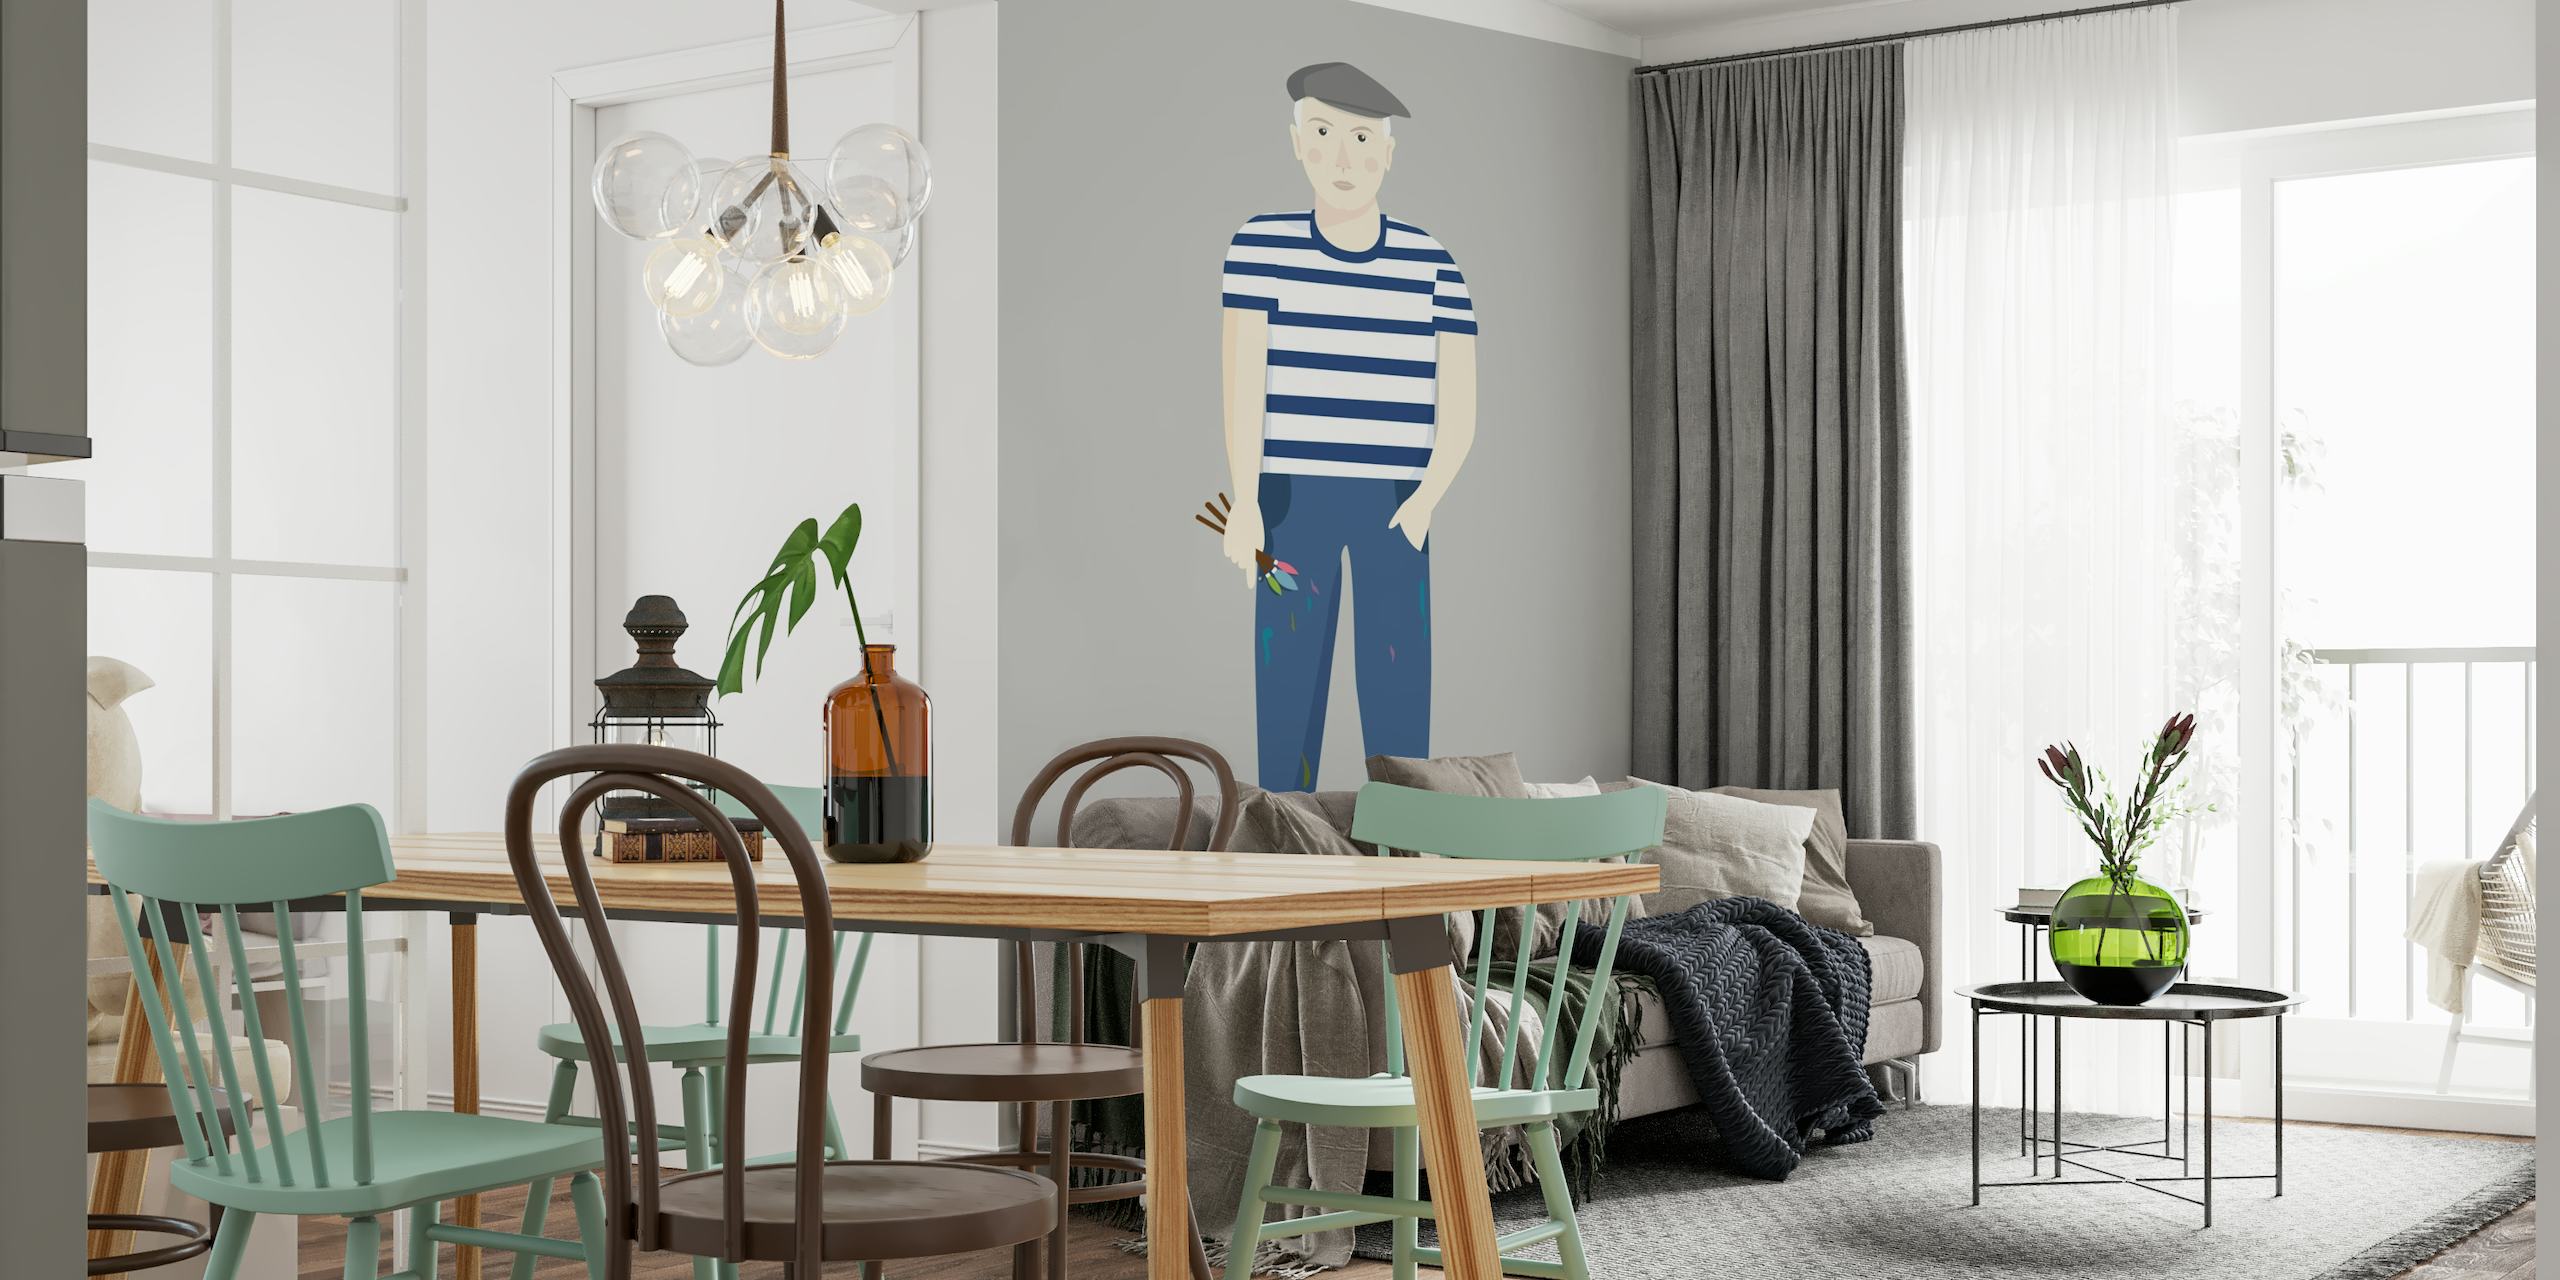 Modern Picasso-inspired wall mural with a character in a striped shirt